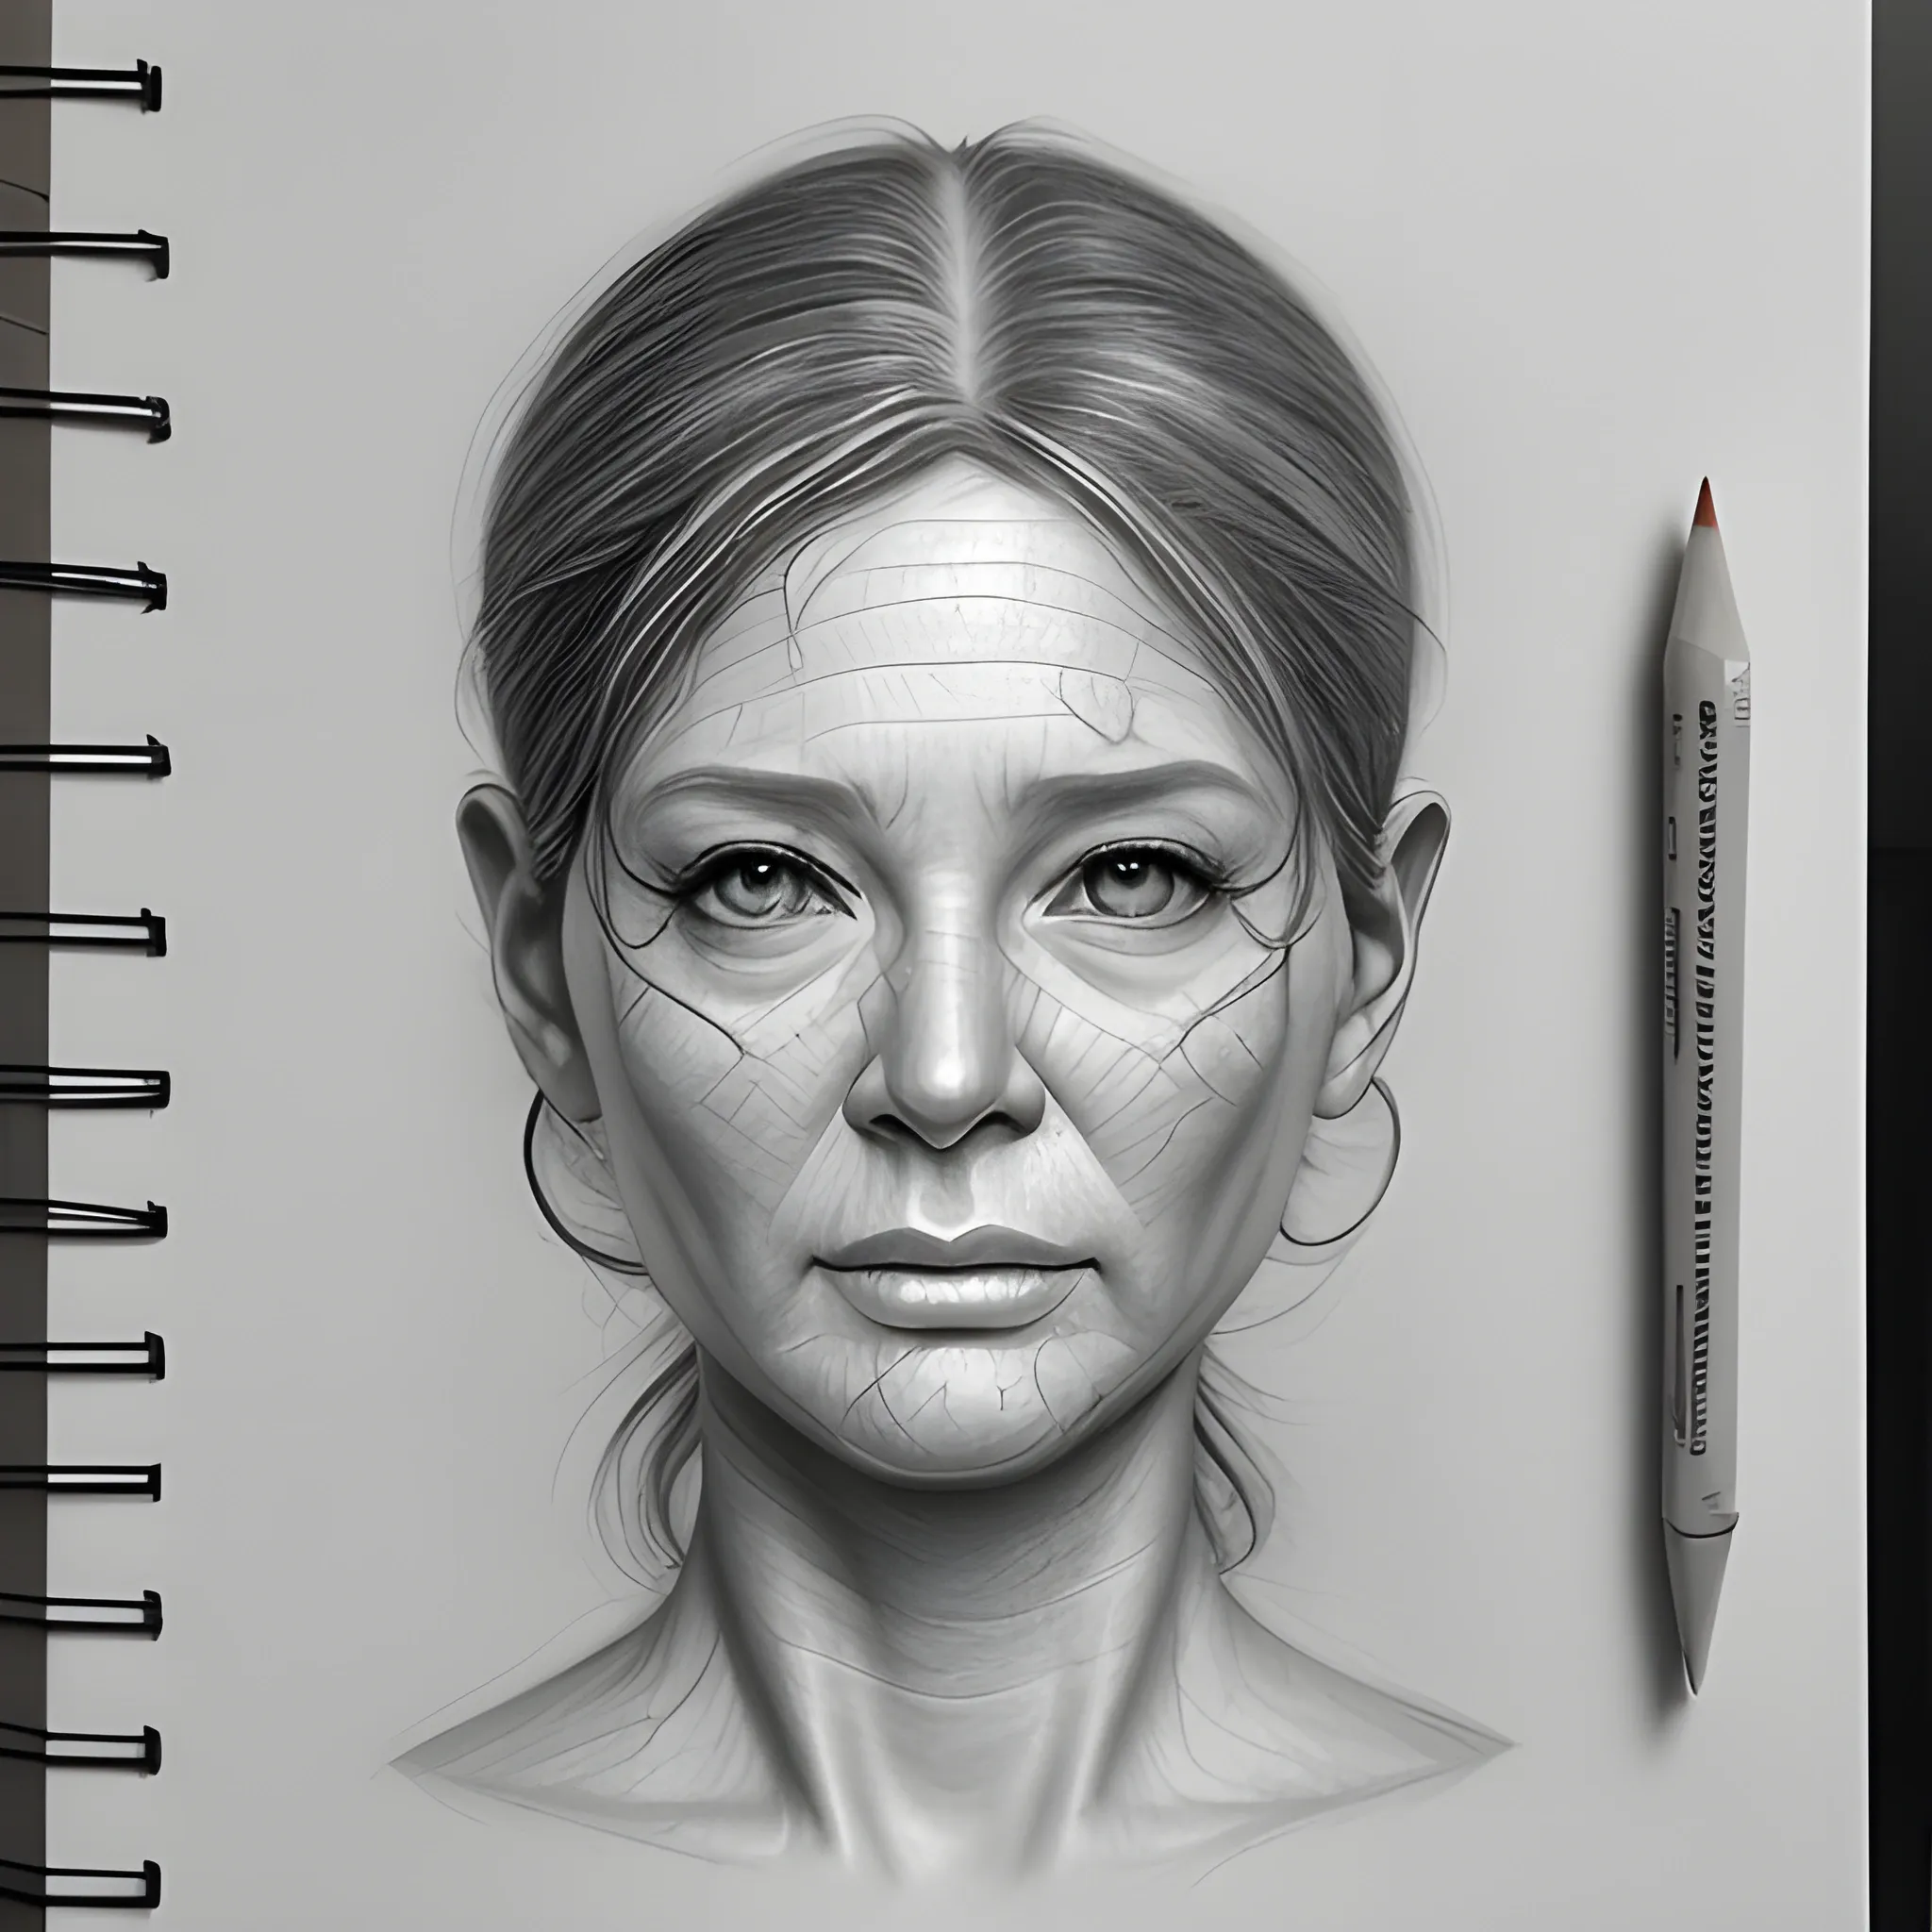 Art of sketch - Realistic 3D illusion portrait Drawing | Facebook